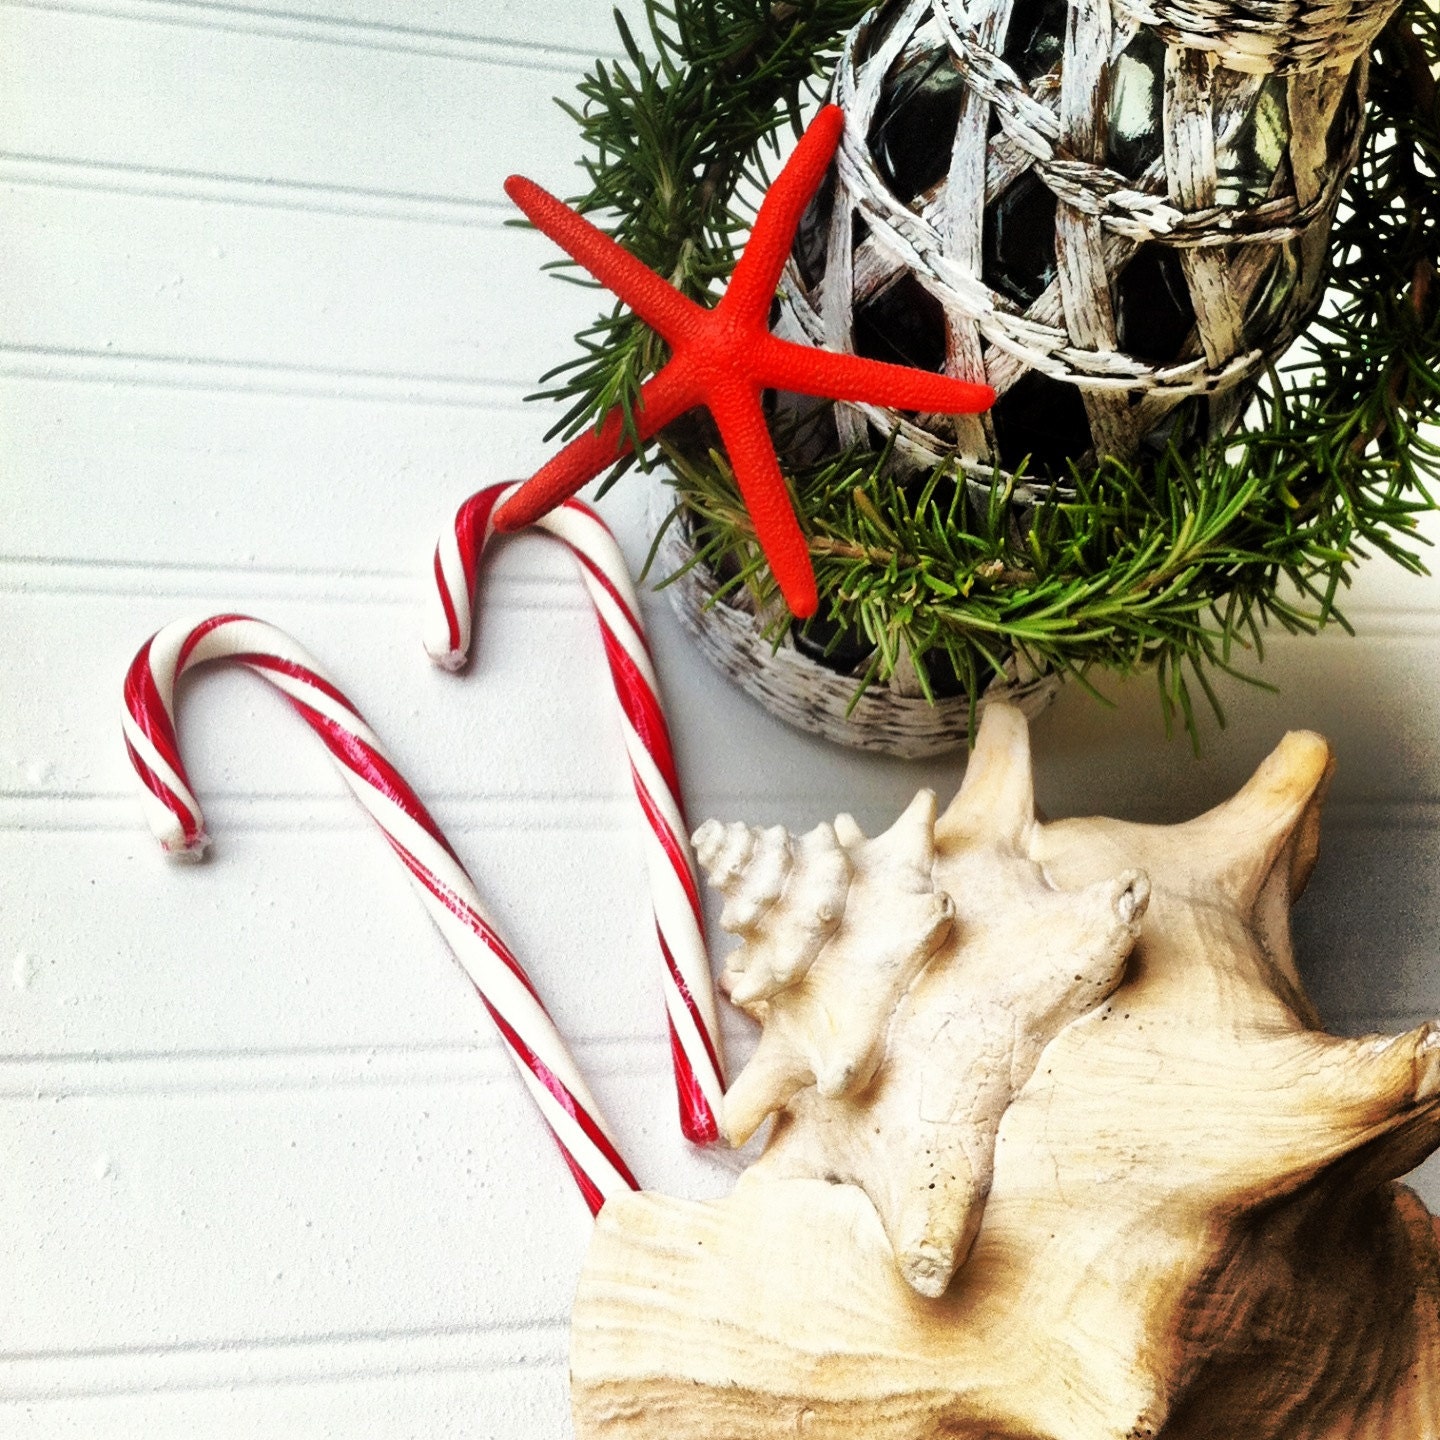 Christmas party hostess gift rosemary wreath beach red starfish wine bottle tag ornament nautical island tropical green organic natural sea